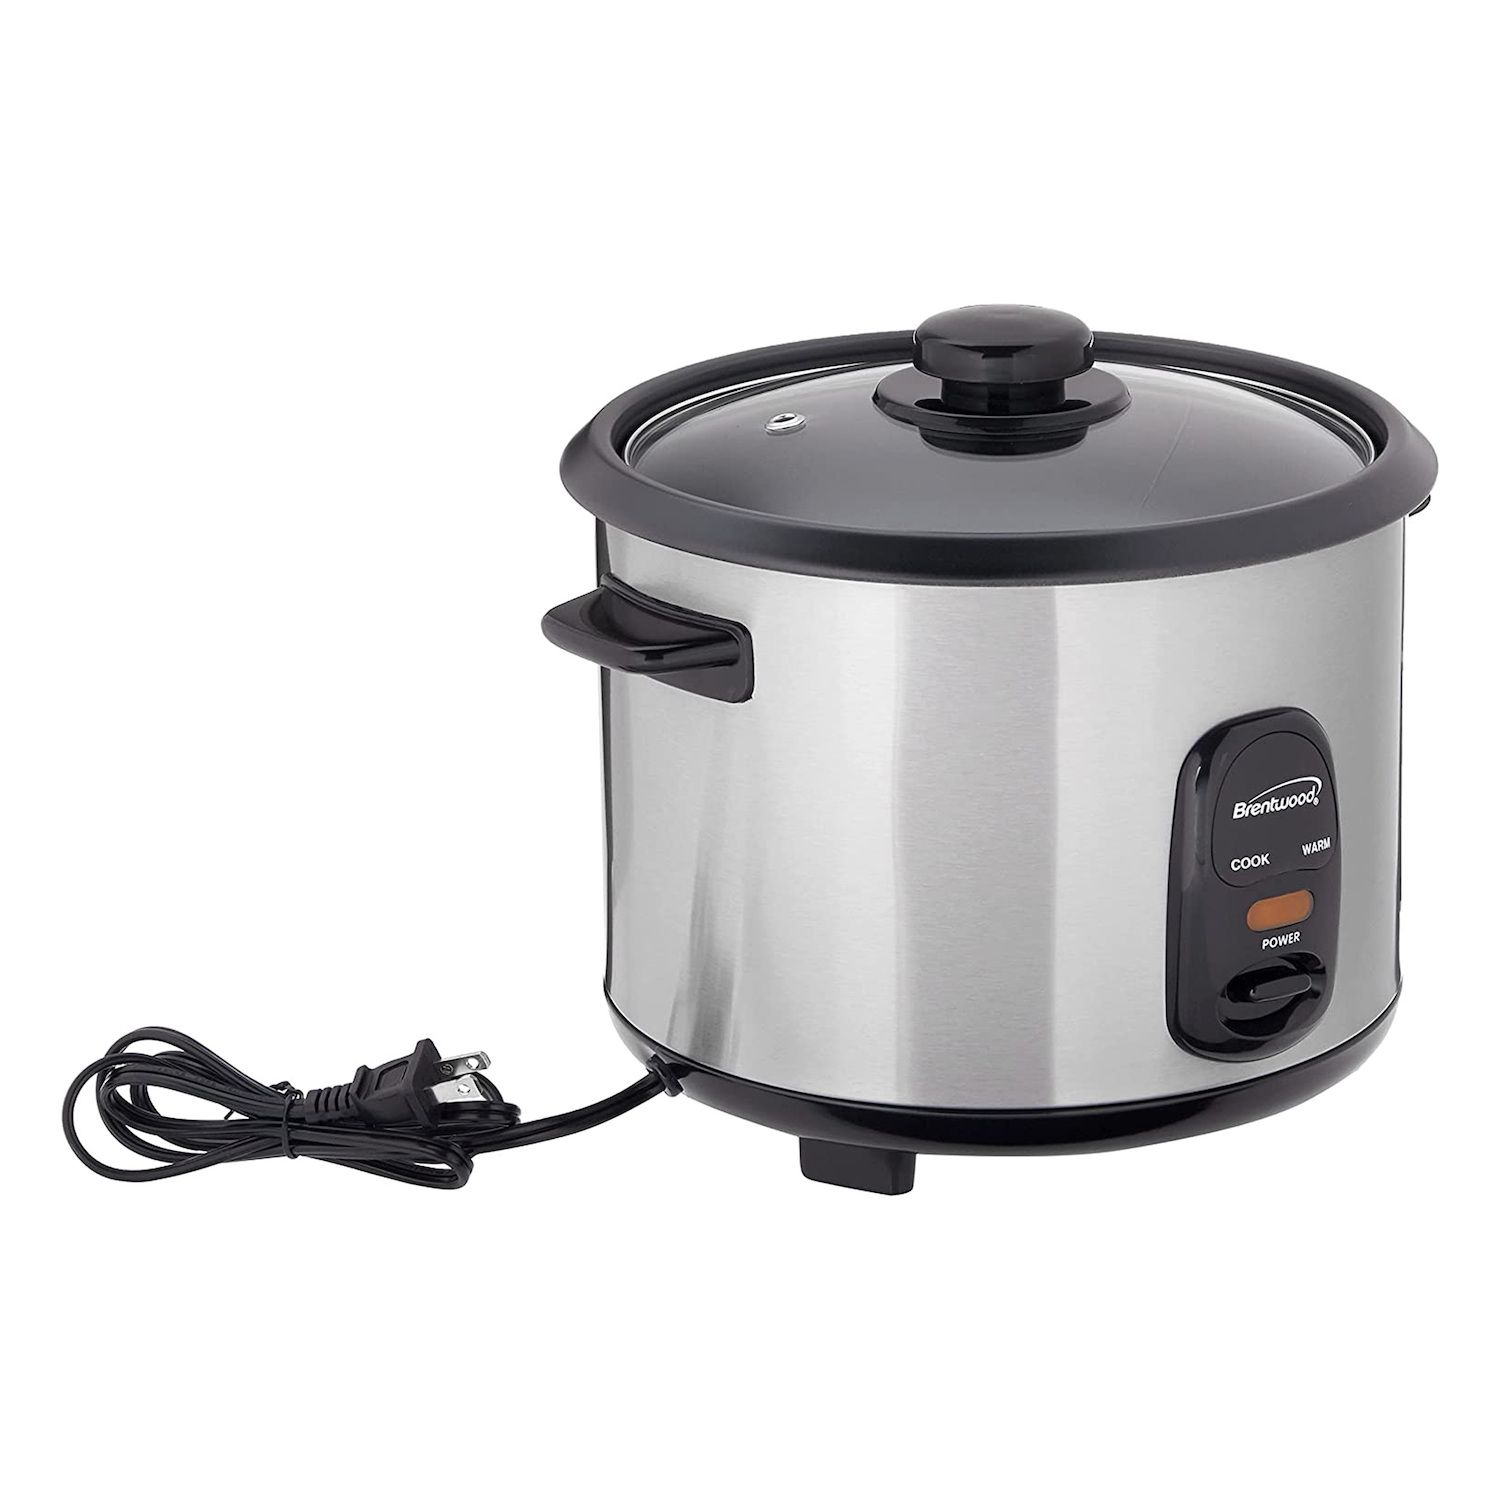 Better Chef Im-400 8-cup (16-cups Cooked) Automatic Rice Cooker In